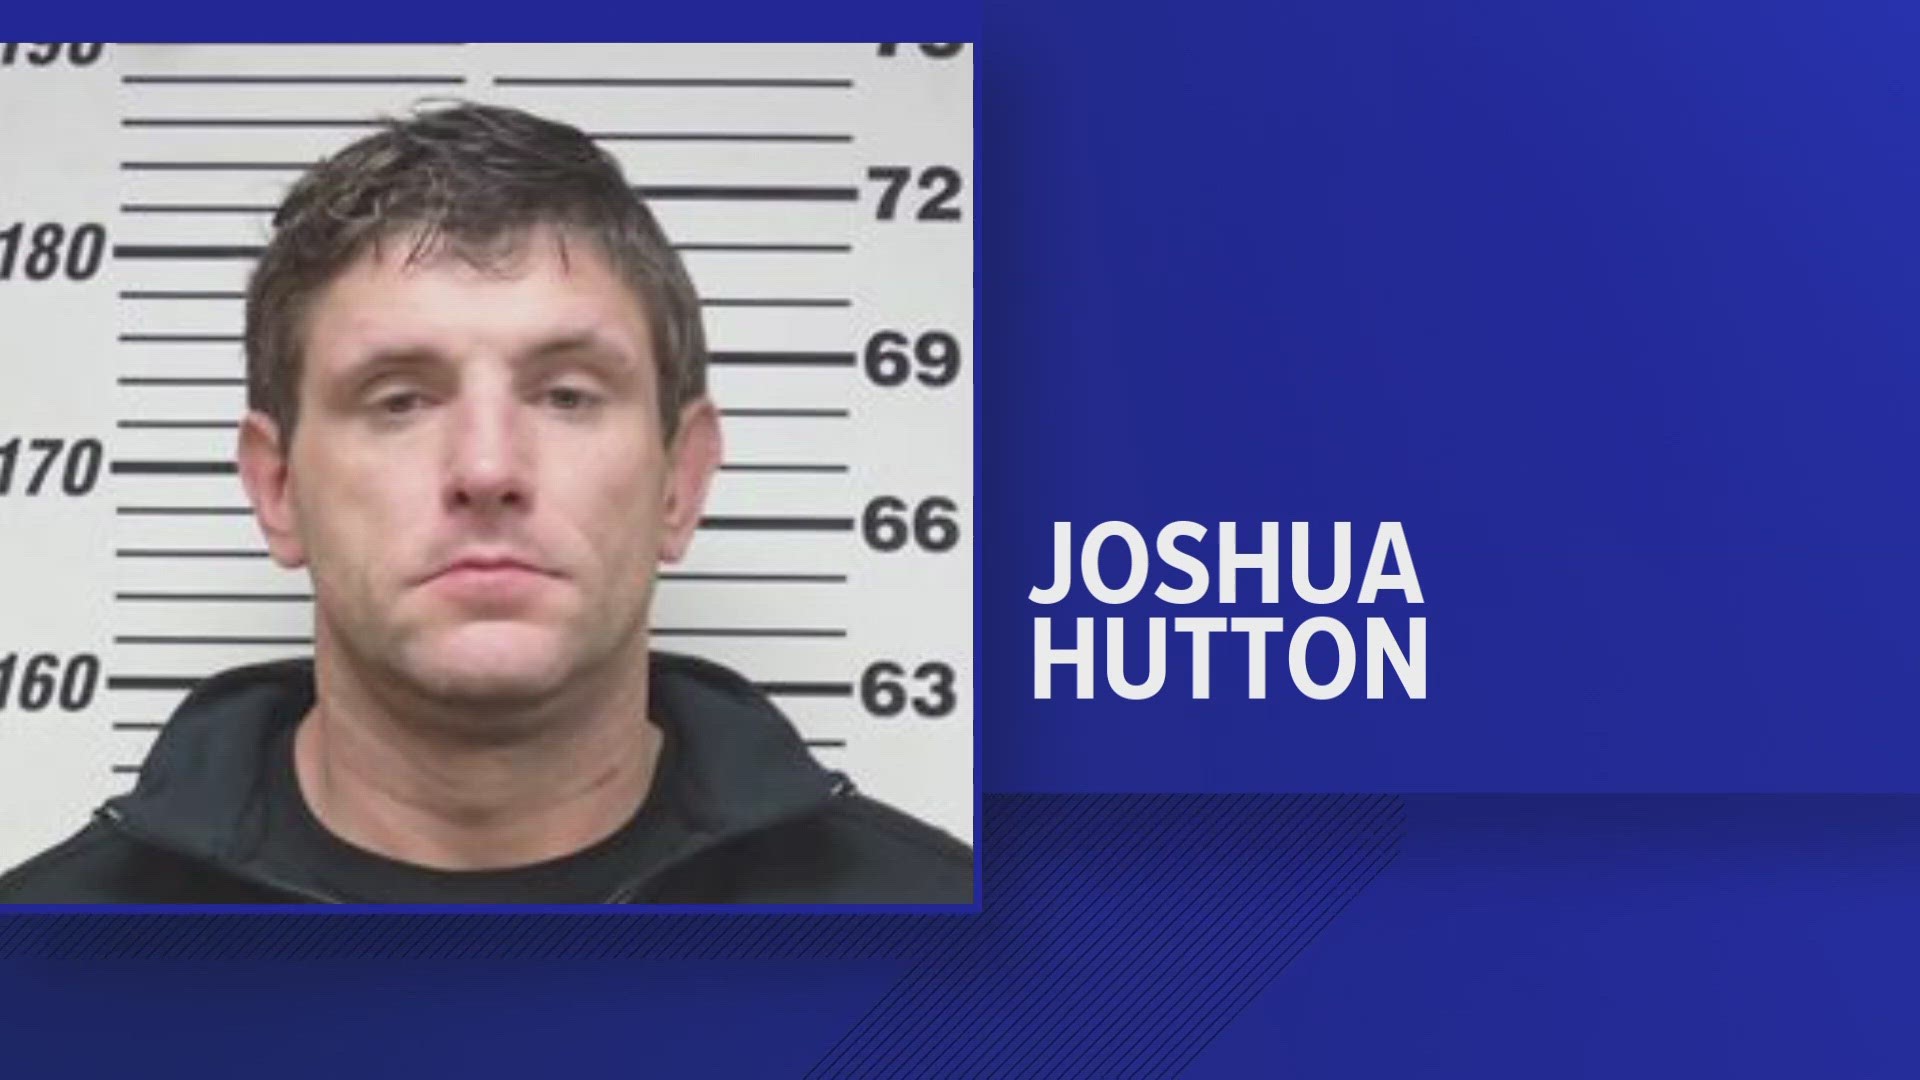 In 2022, Joshua Hutton was sentenced to eight years probation for aggravated burglary, aggravated assault and delivery/sale of meth, according to officials.